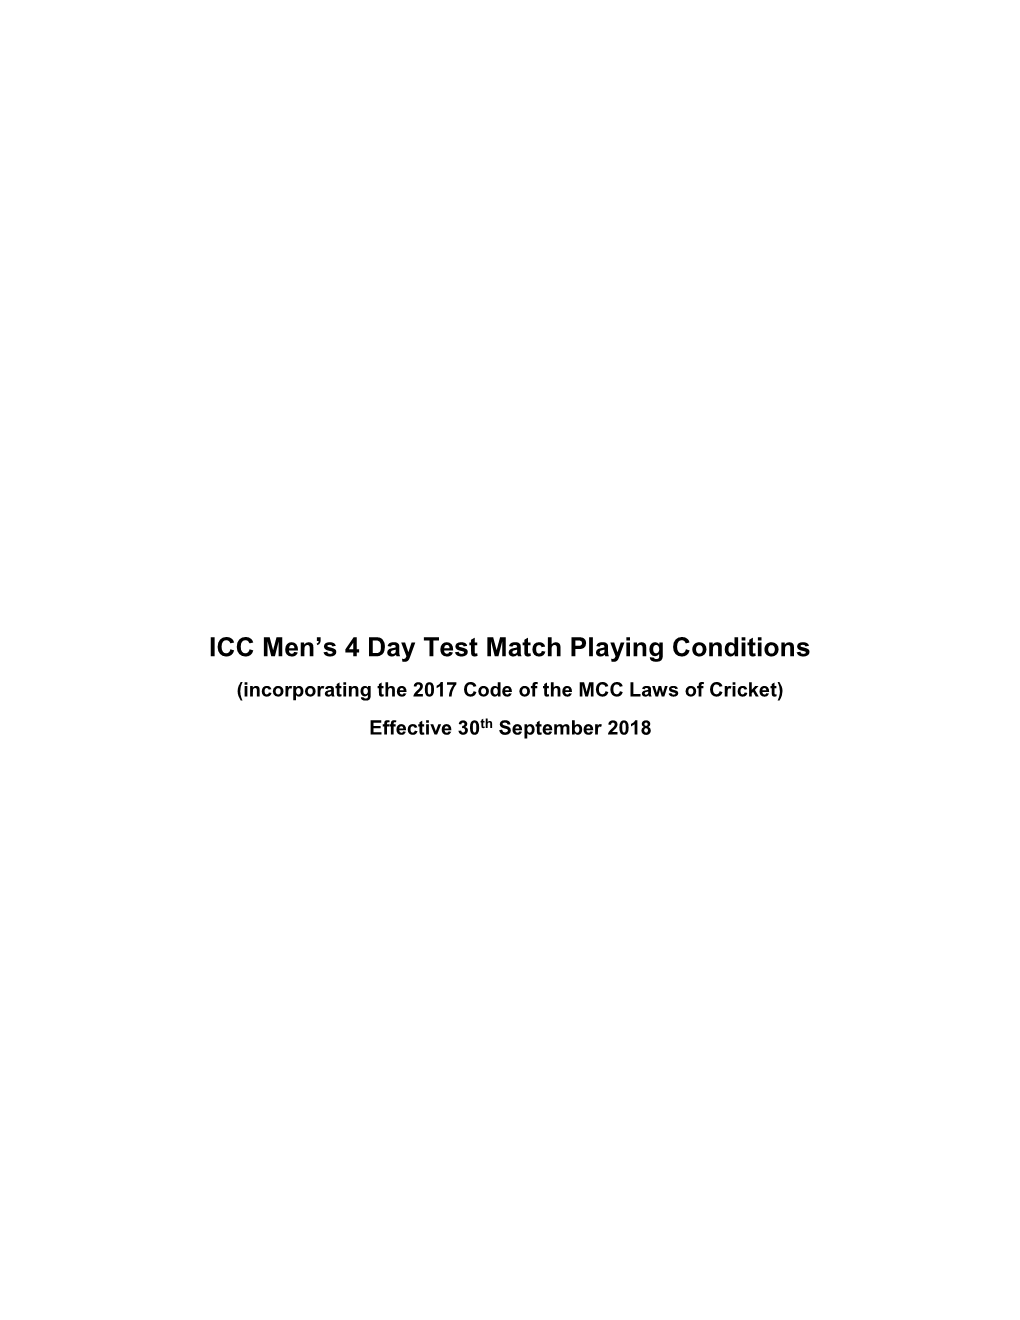 ICC Men's 4 Day Test Match Playing Conditions